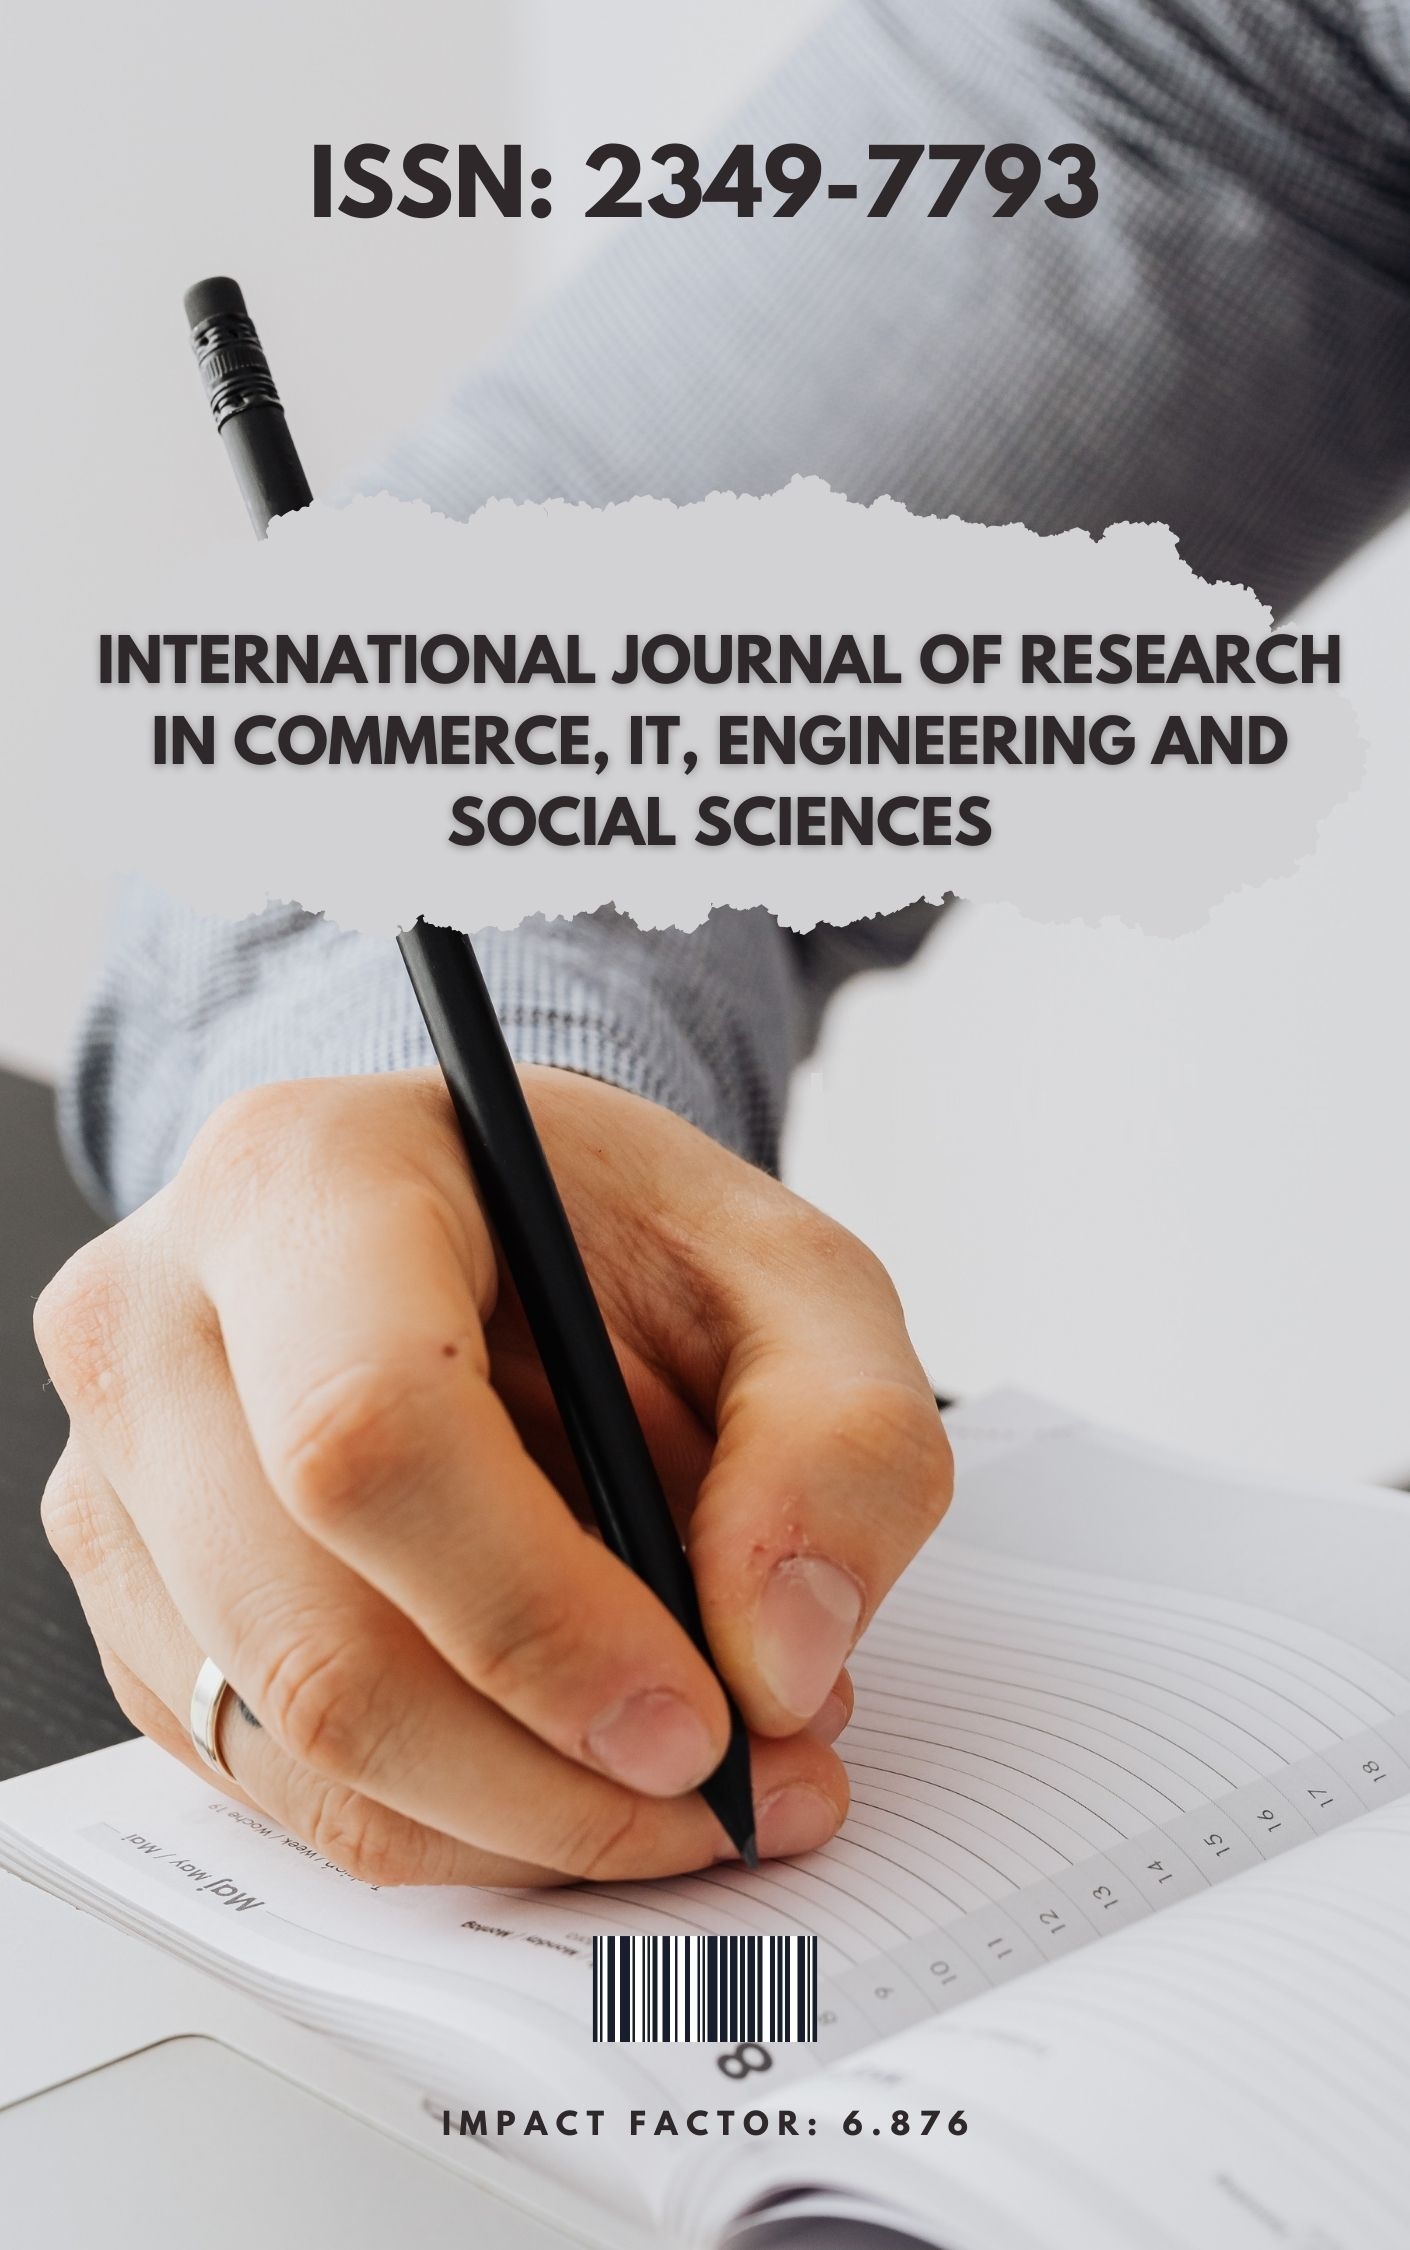 					View Vol. 15 No. 12 (2021): International Journal of Research in Commerce, IT, Engineering, and Social Sciences
				